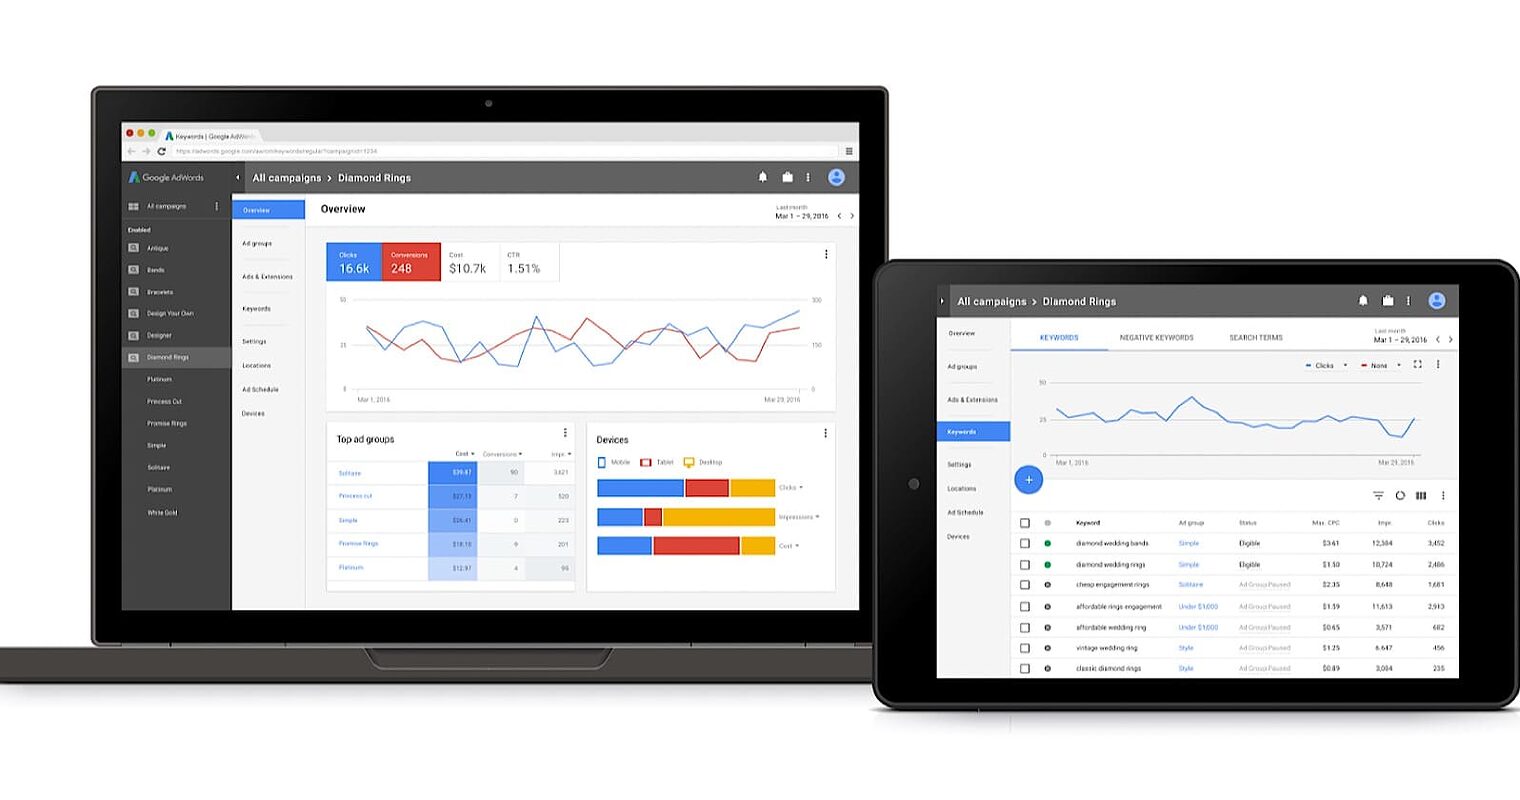 Google’s New AdWords Experience is Now Available to All Advertisers